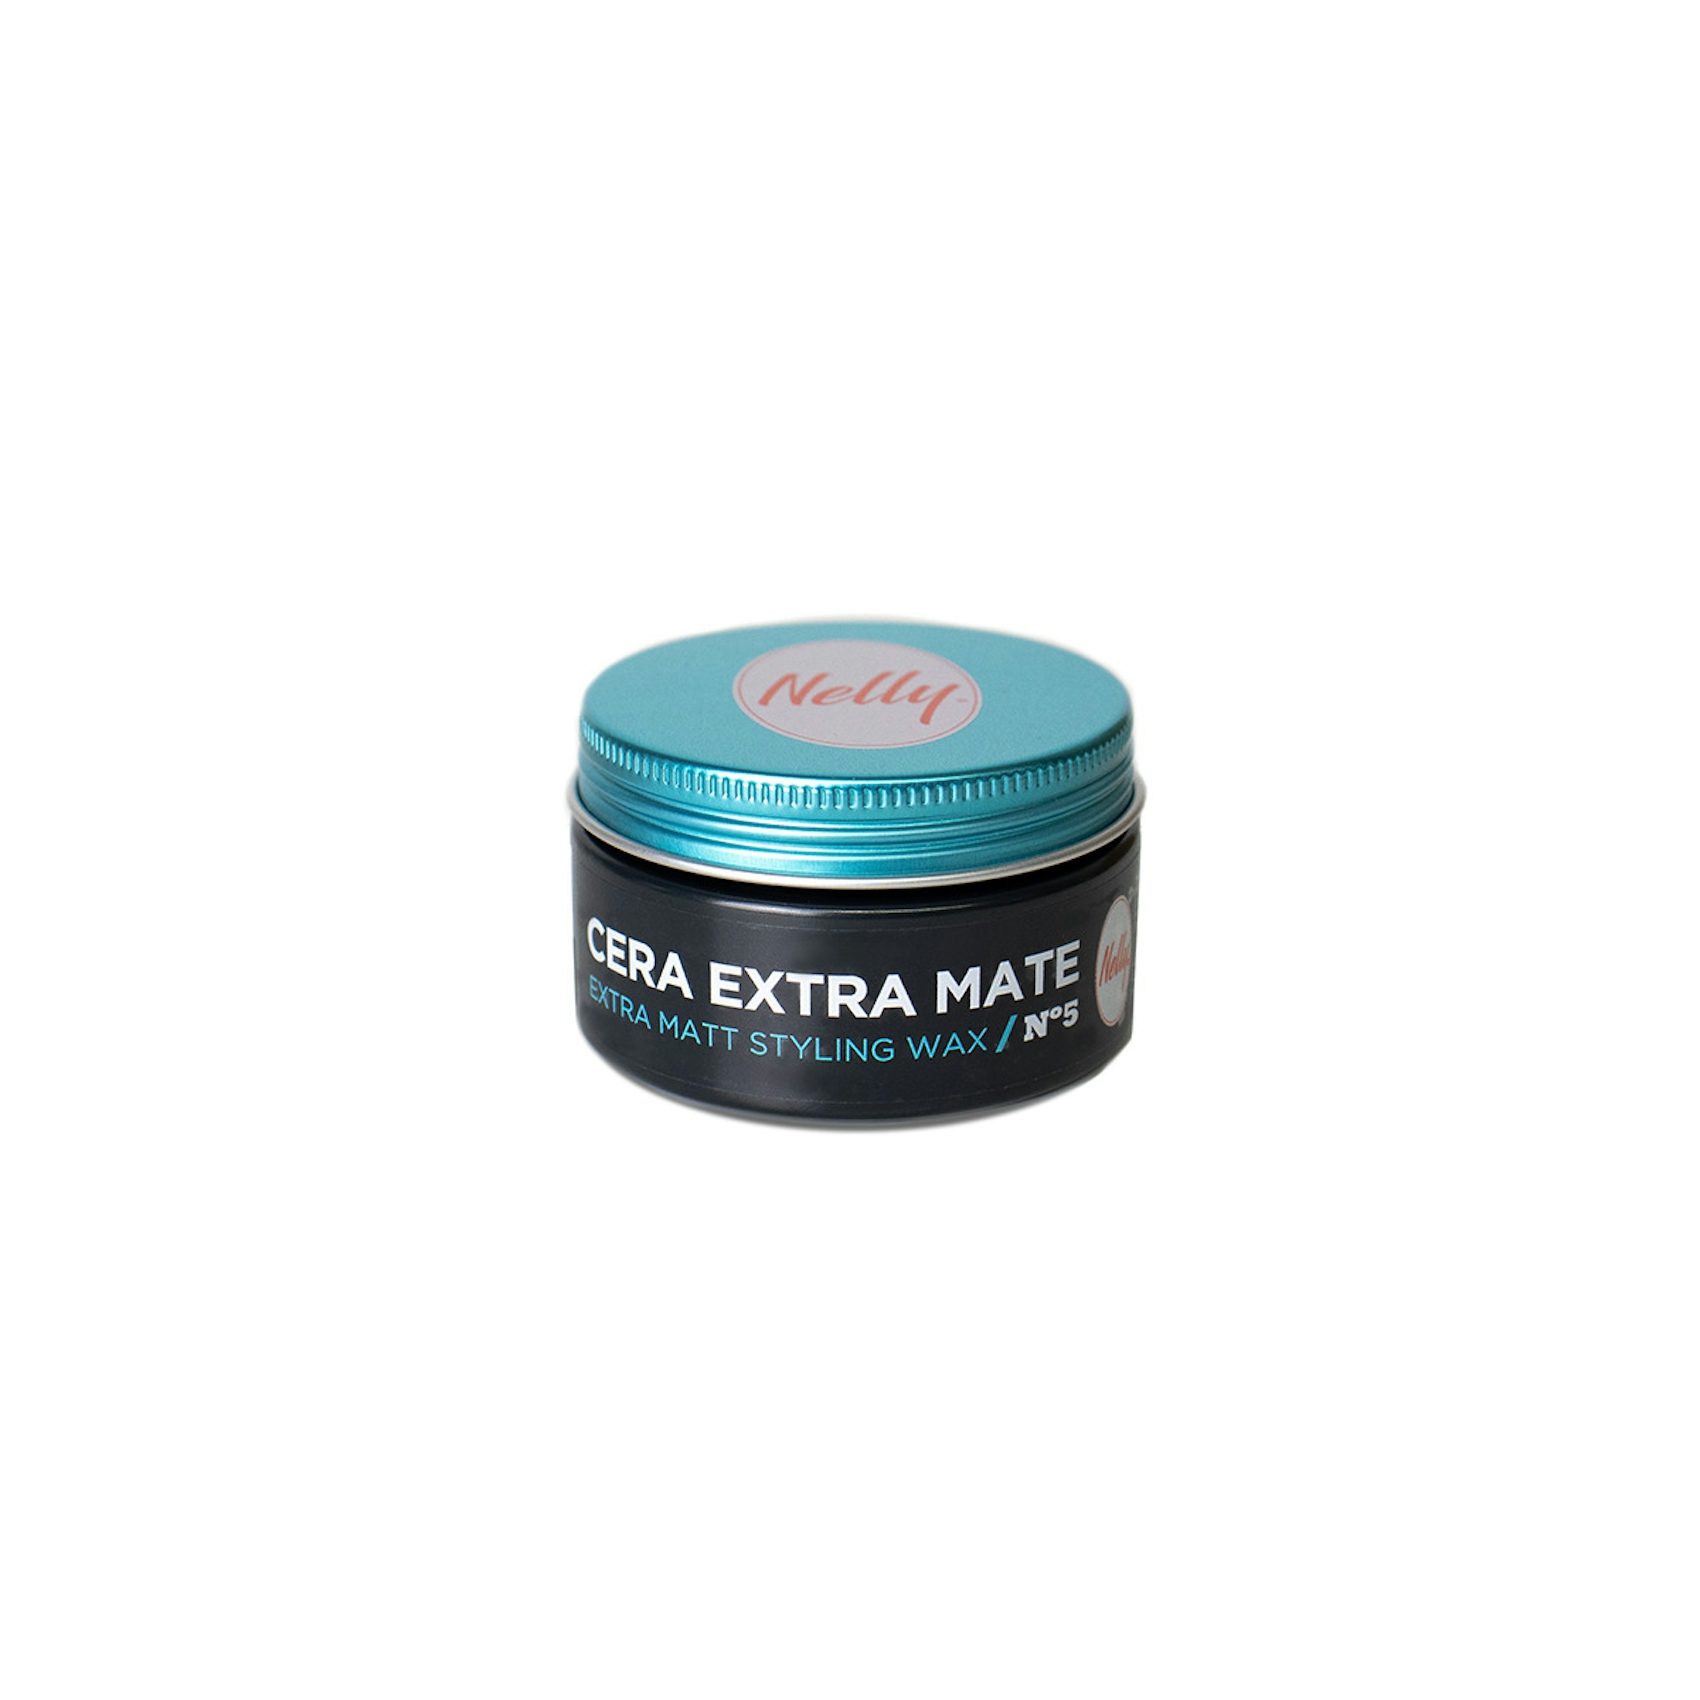 Cera Extra Mate Nº 5 NELLY 100 Ml